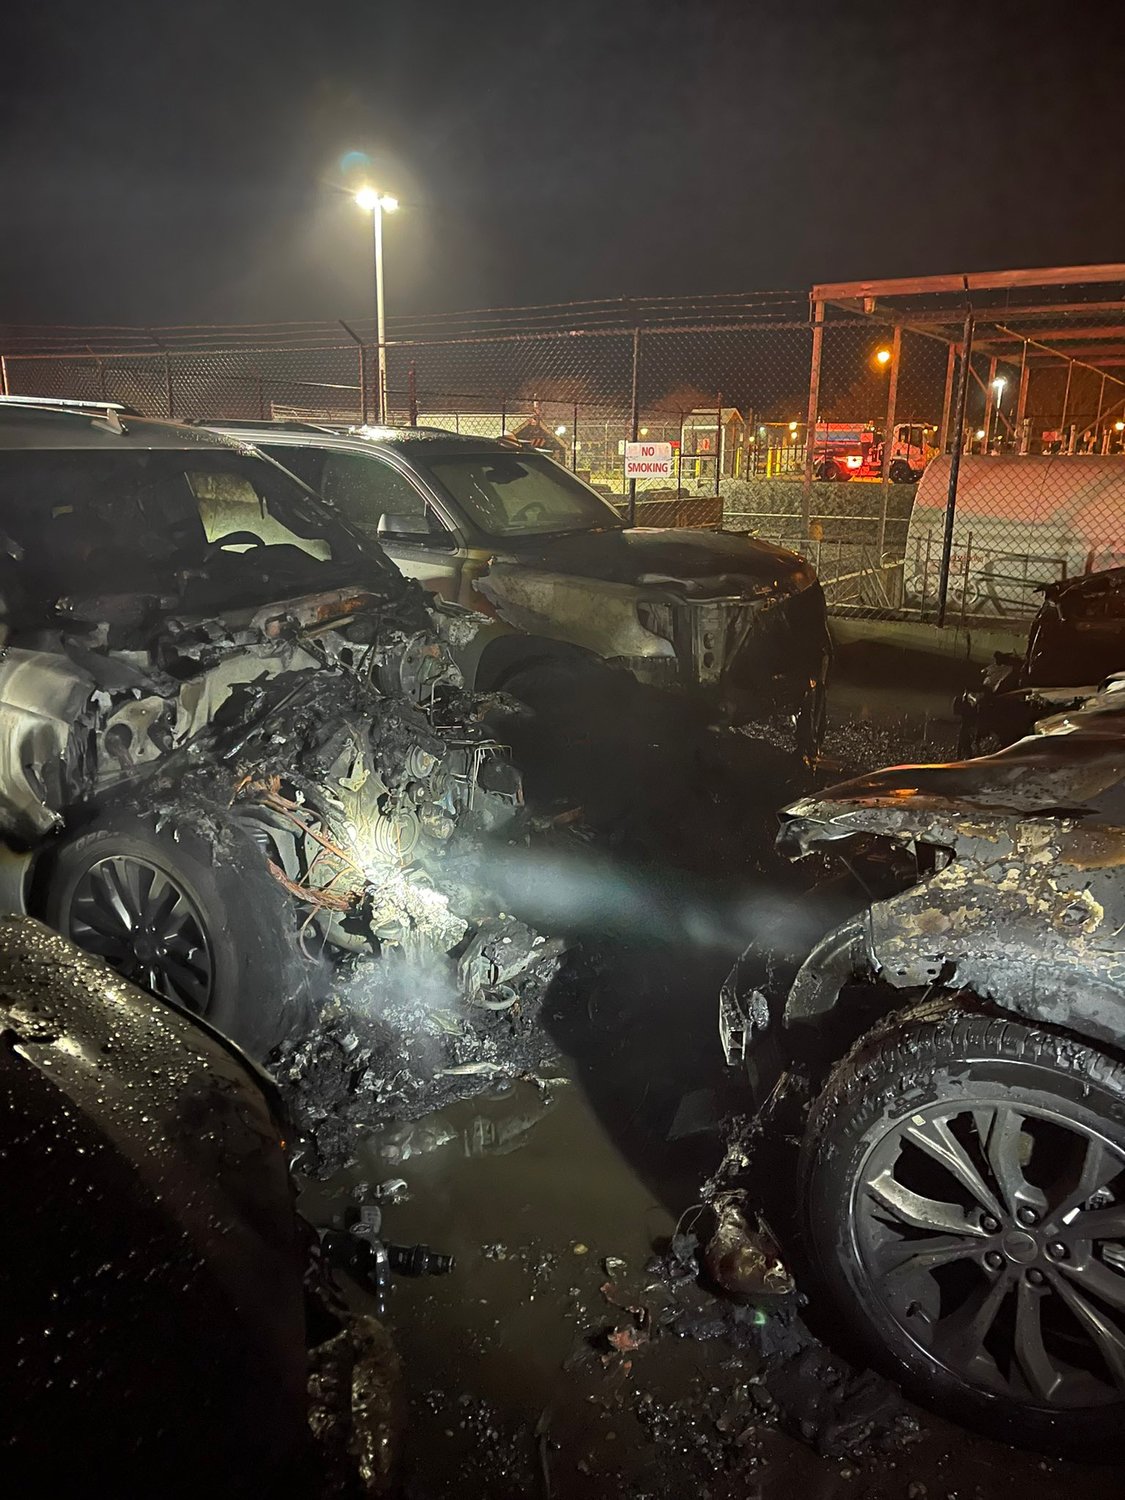 Heavy damage to vehicles in the airport rental-car overflow lot.